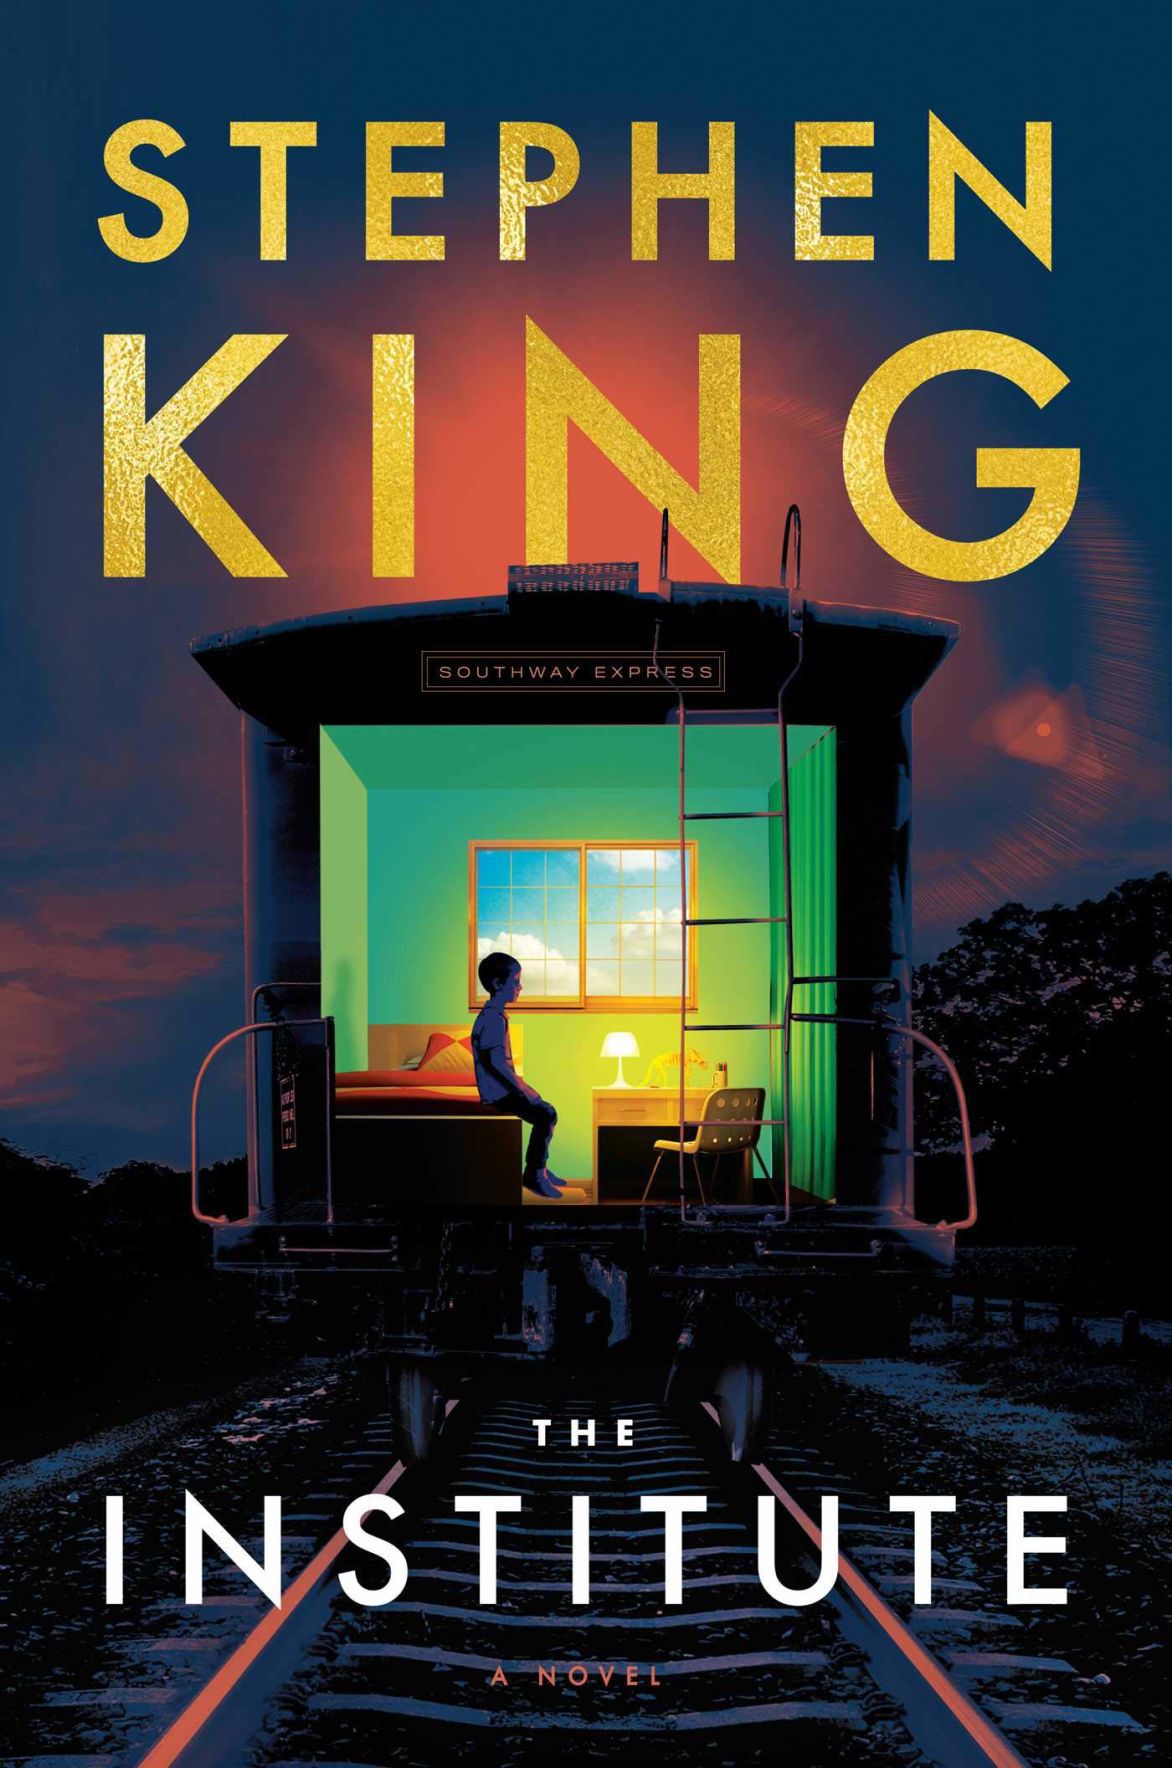 the institute stephen king review